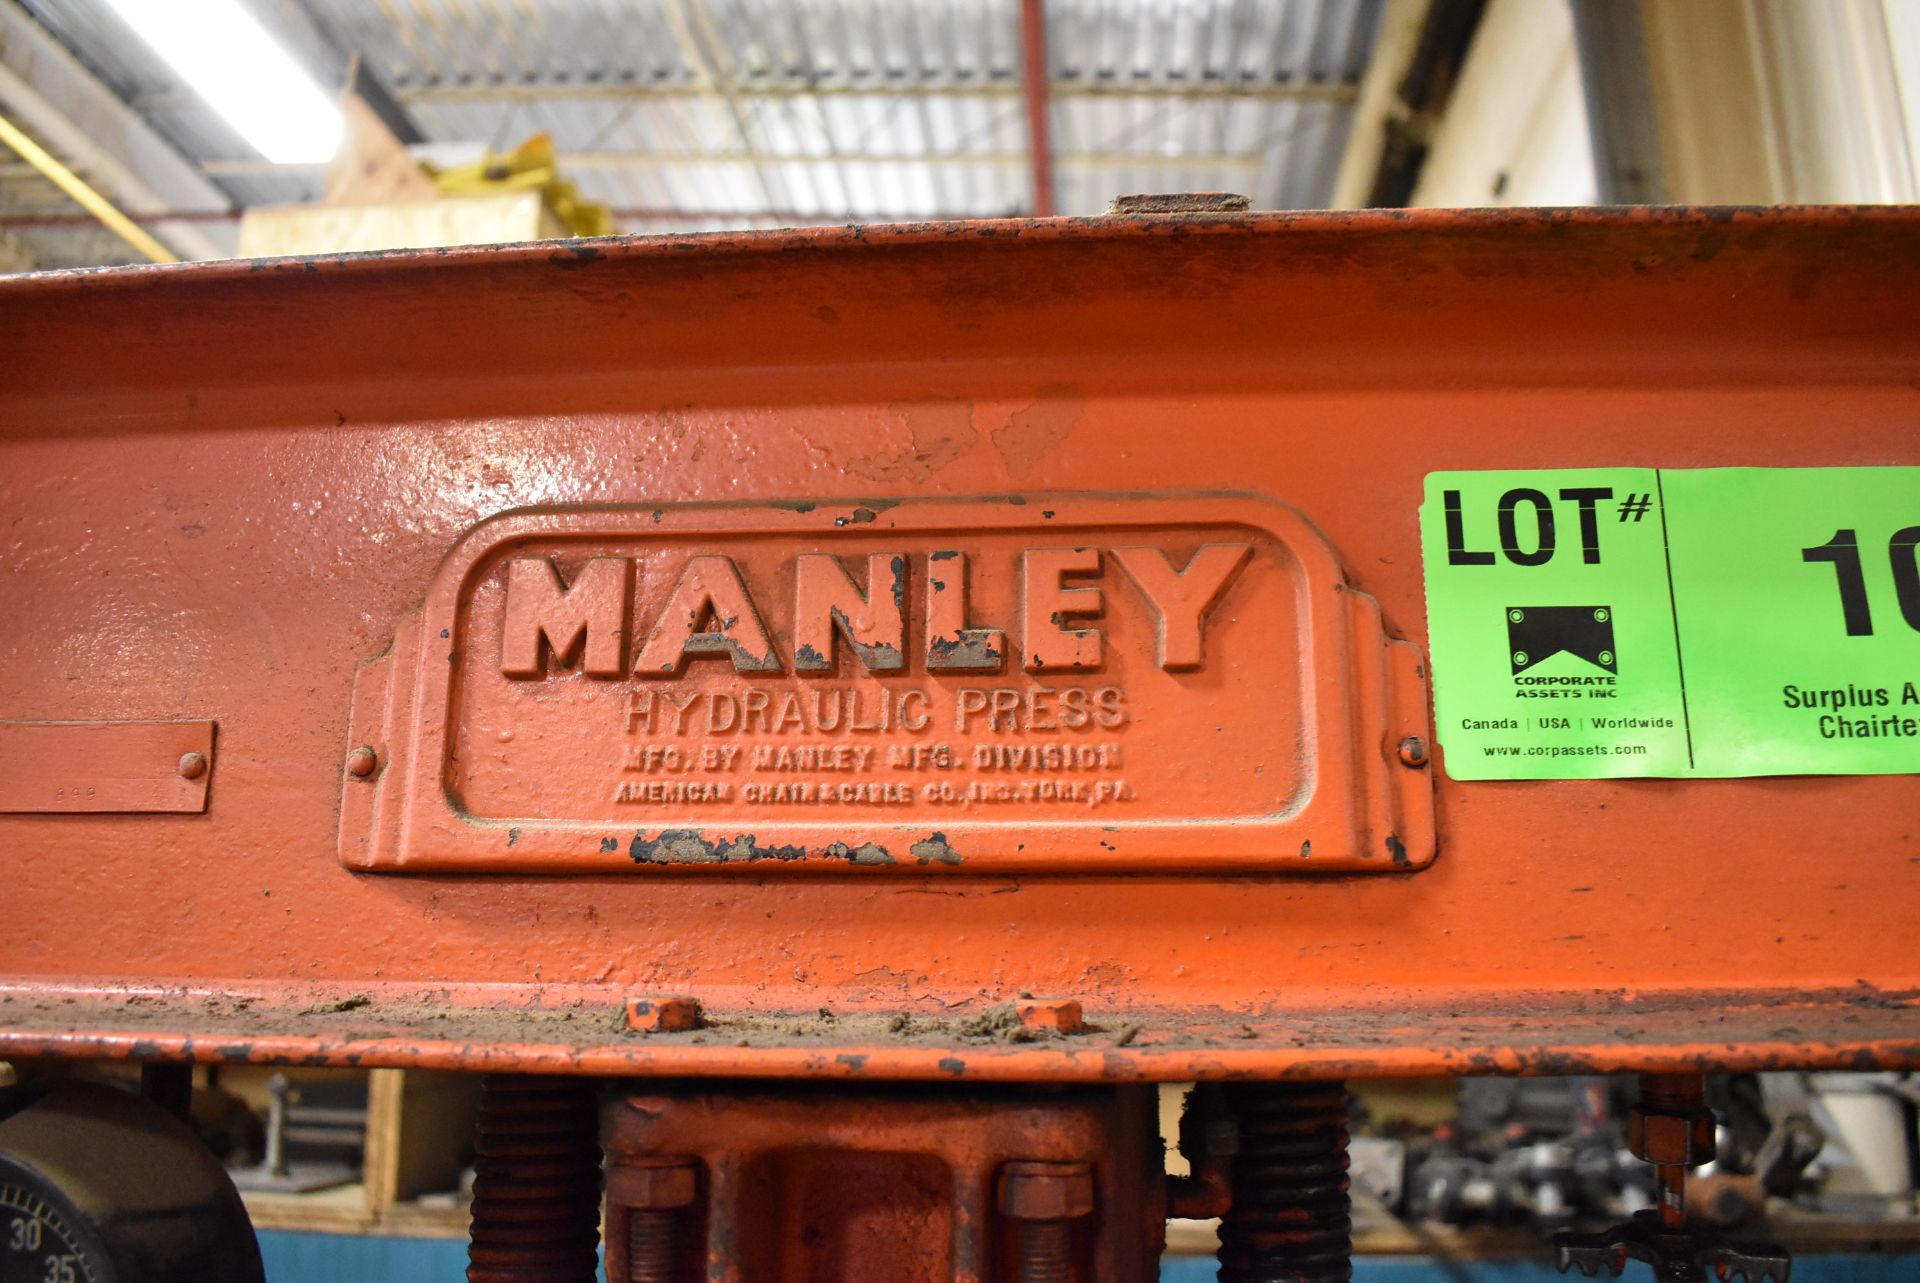 MANLY H-FRAME 50TON SHOP PRESS, S/N: N/A [RIGGING FEE FOR LOT #10 - $100 CDN PLUS APPLICABLE TAXES] - Image 3 of 3